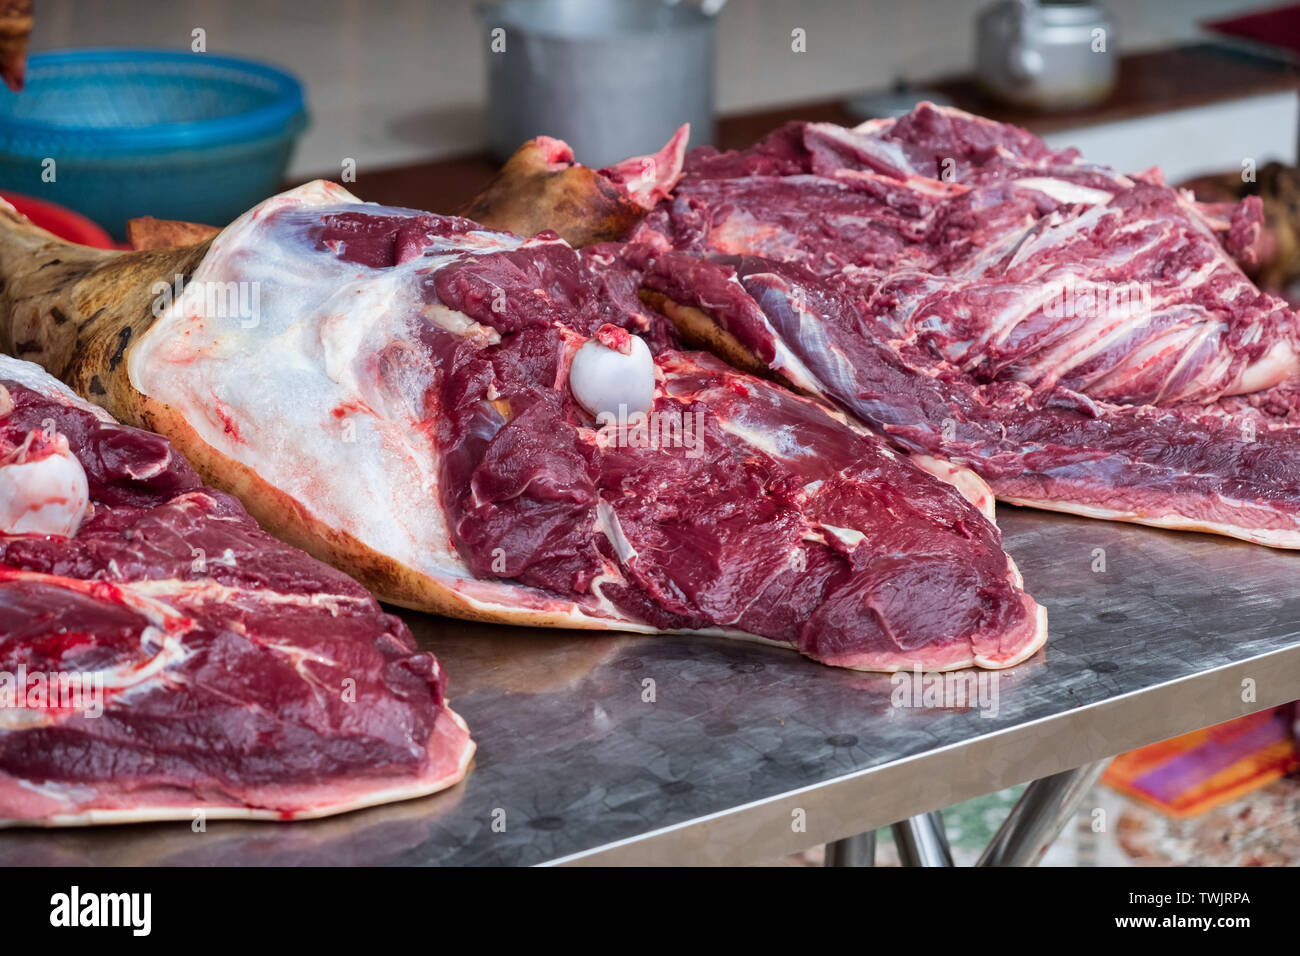 Dog meat sliced local food put for selling Stock Photo